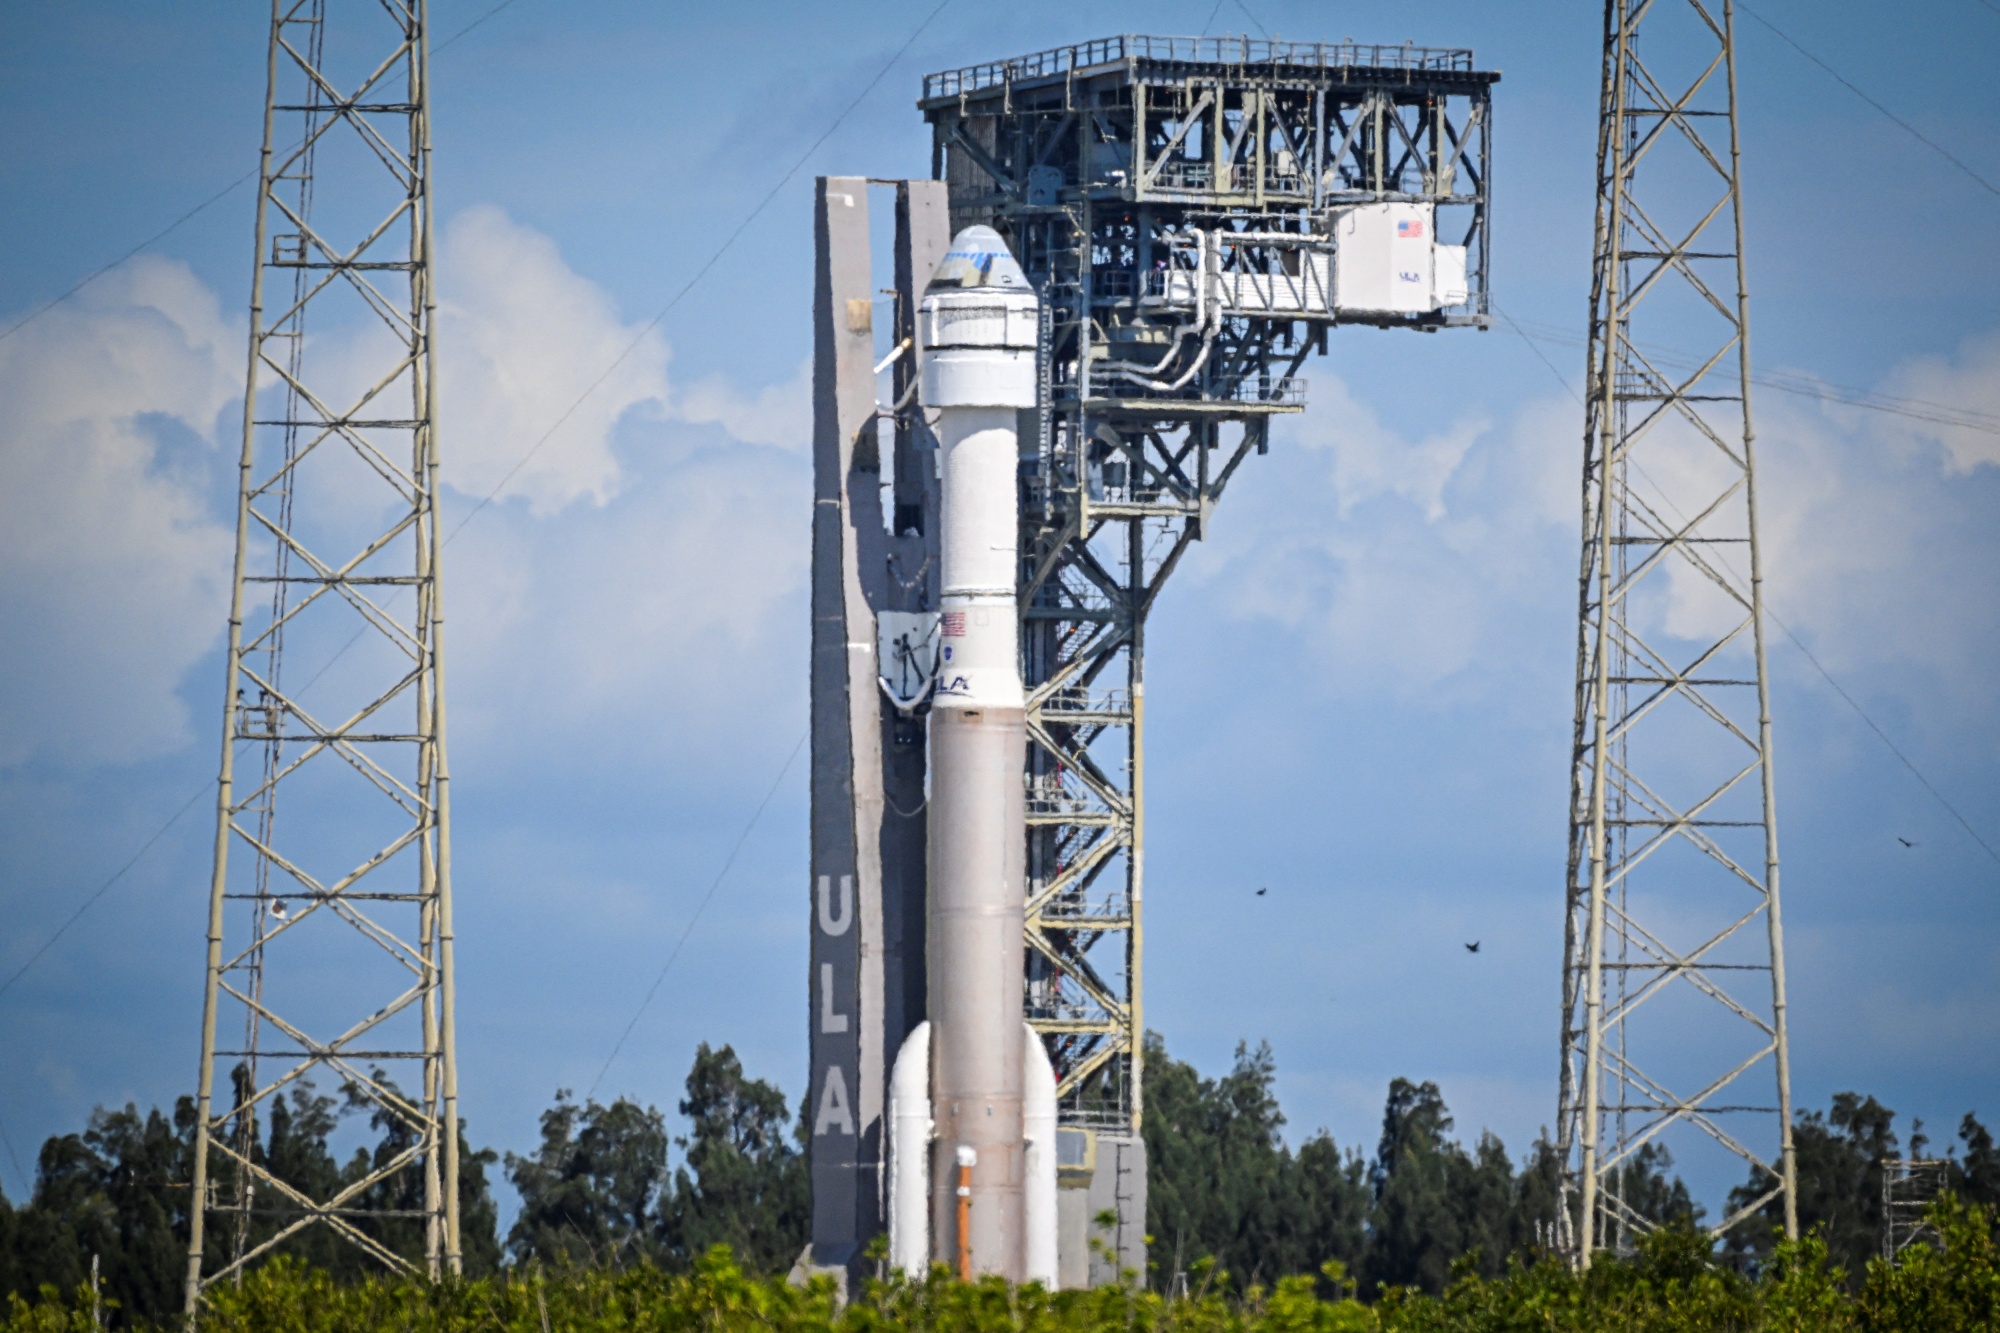 United Launch Alliance’s Atlas V rocket at Cape Canaveral on May 4.